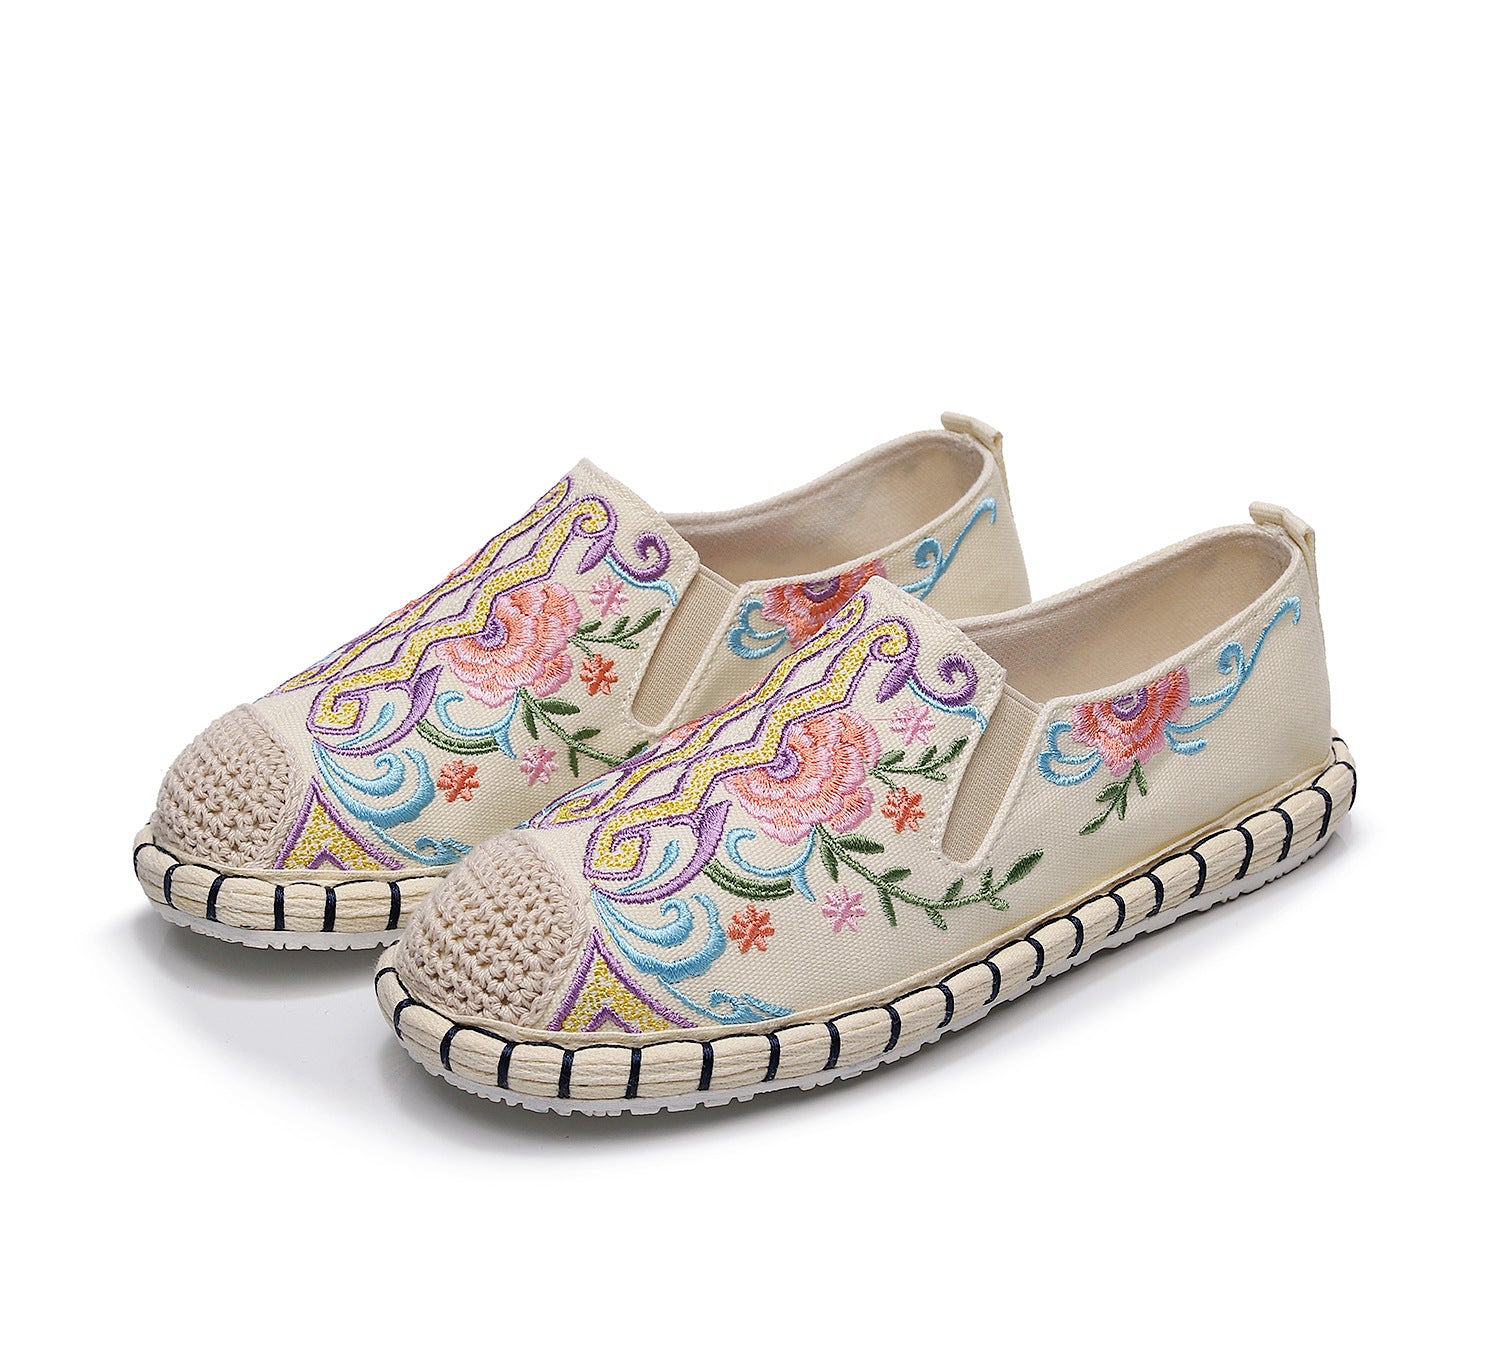 Women's Soft Bottom Multi-layer Ethnic Style Embroidery Canvas Shoes